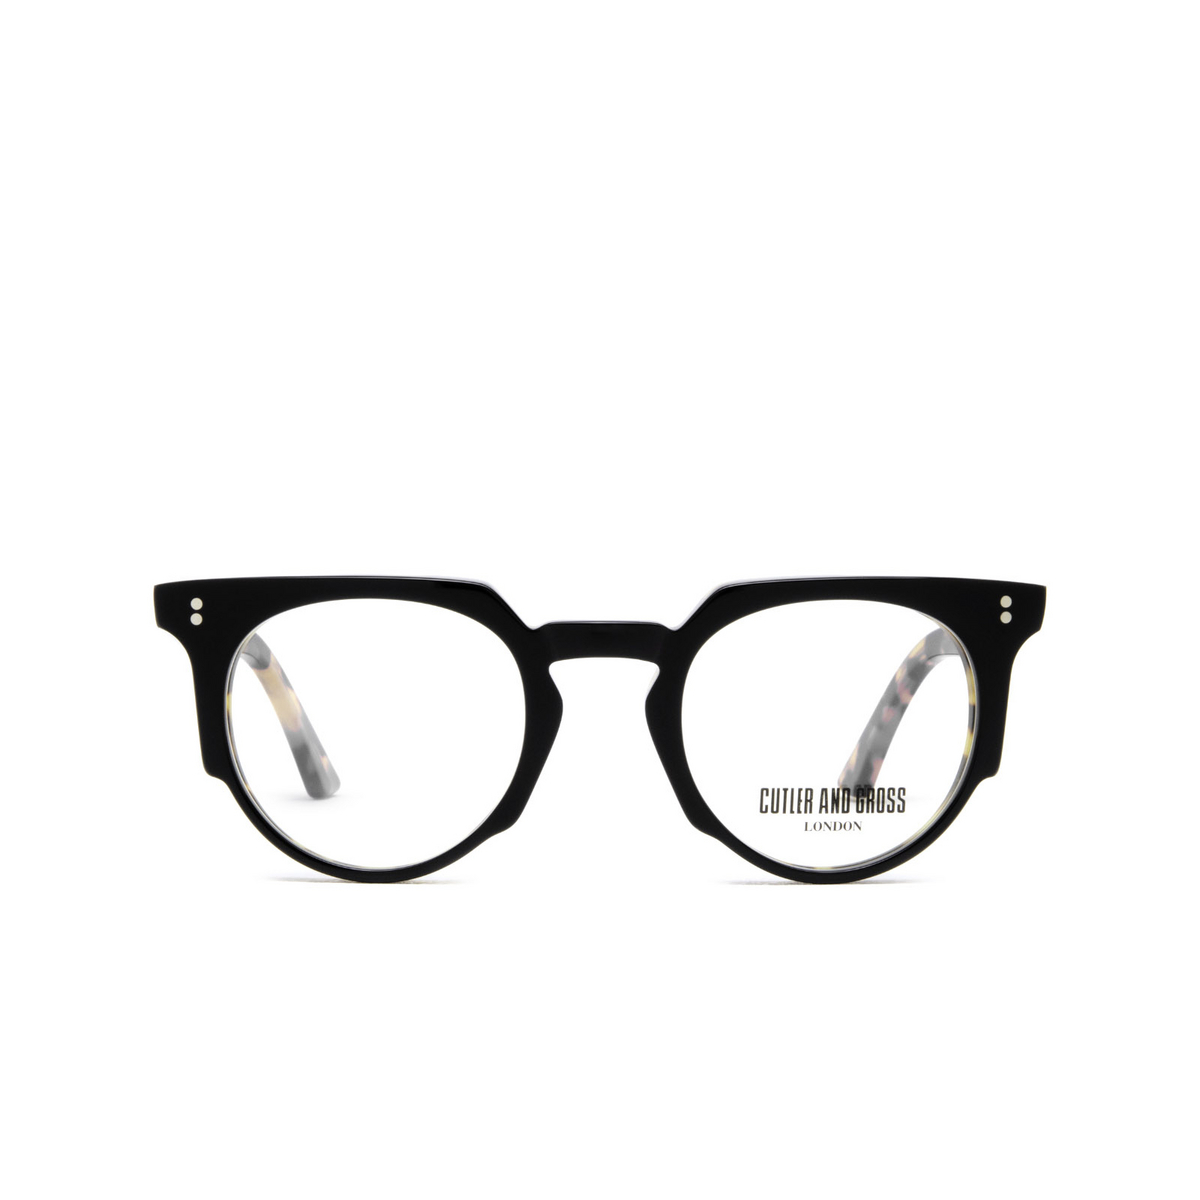 Cutler and Gross® Irregular Eyeglasses: 1383 color 03 Black On Camo - front view